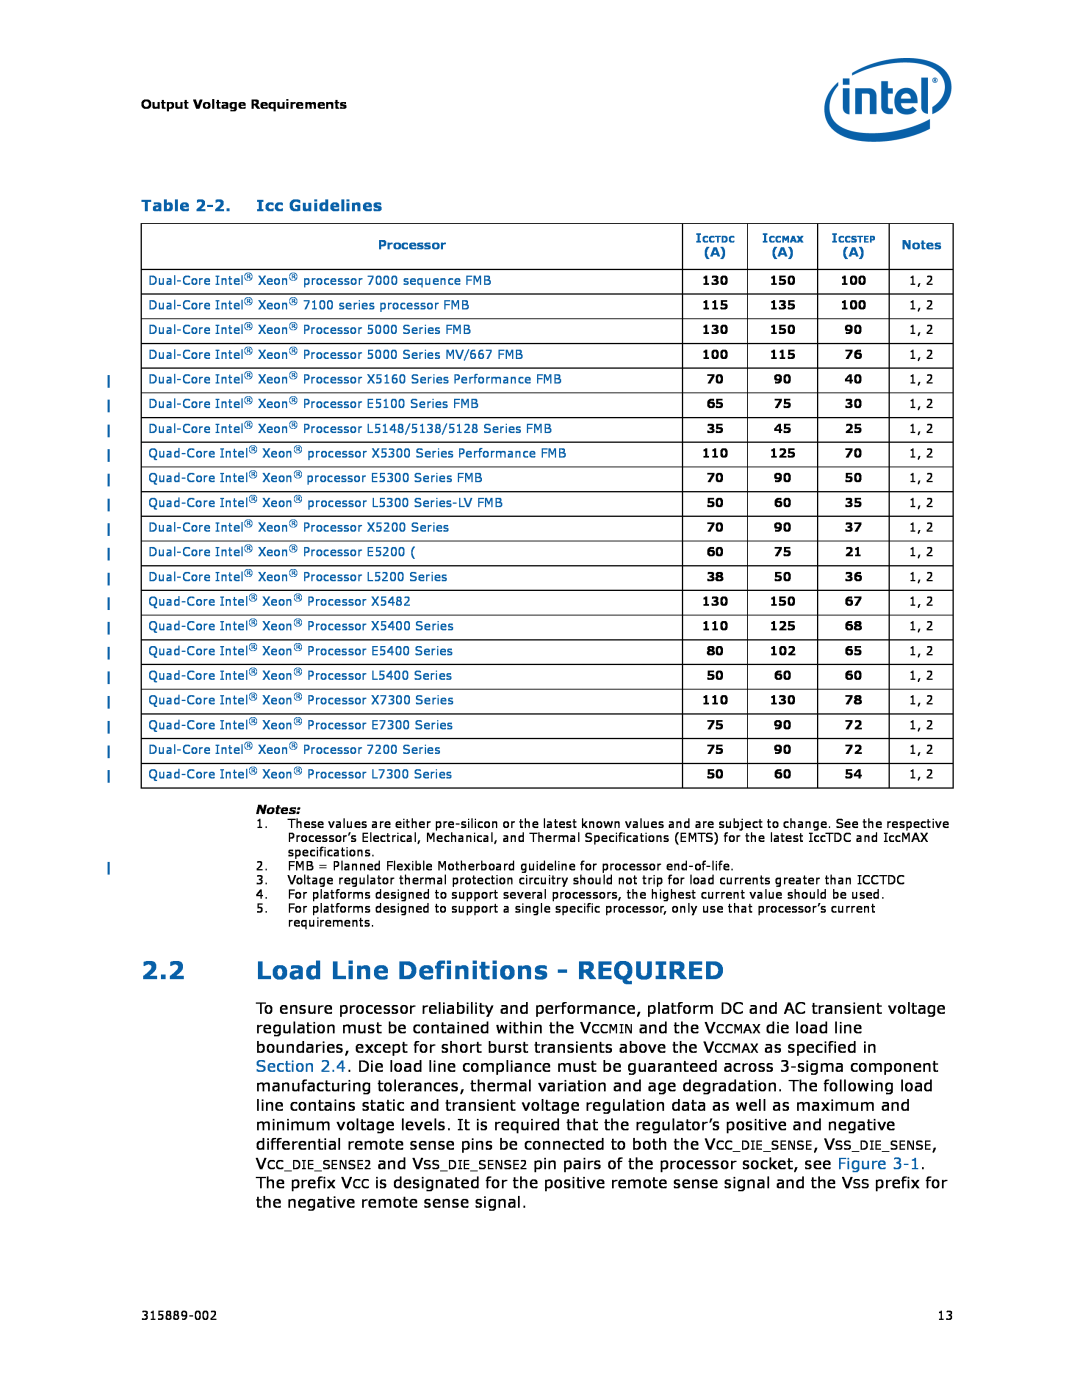 Intel 315889-002 manual 2.2Load Line Definitions - REQUIRED, 2.Icc Guidelines, Output Voltage Requirements 